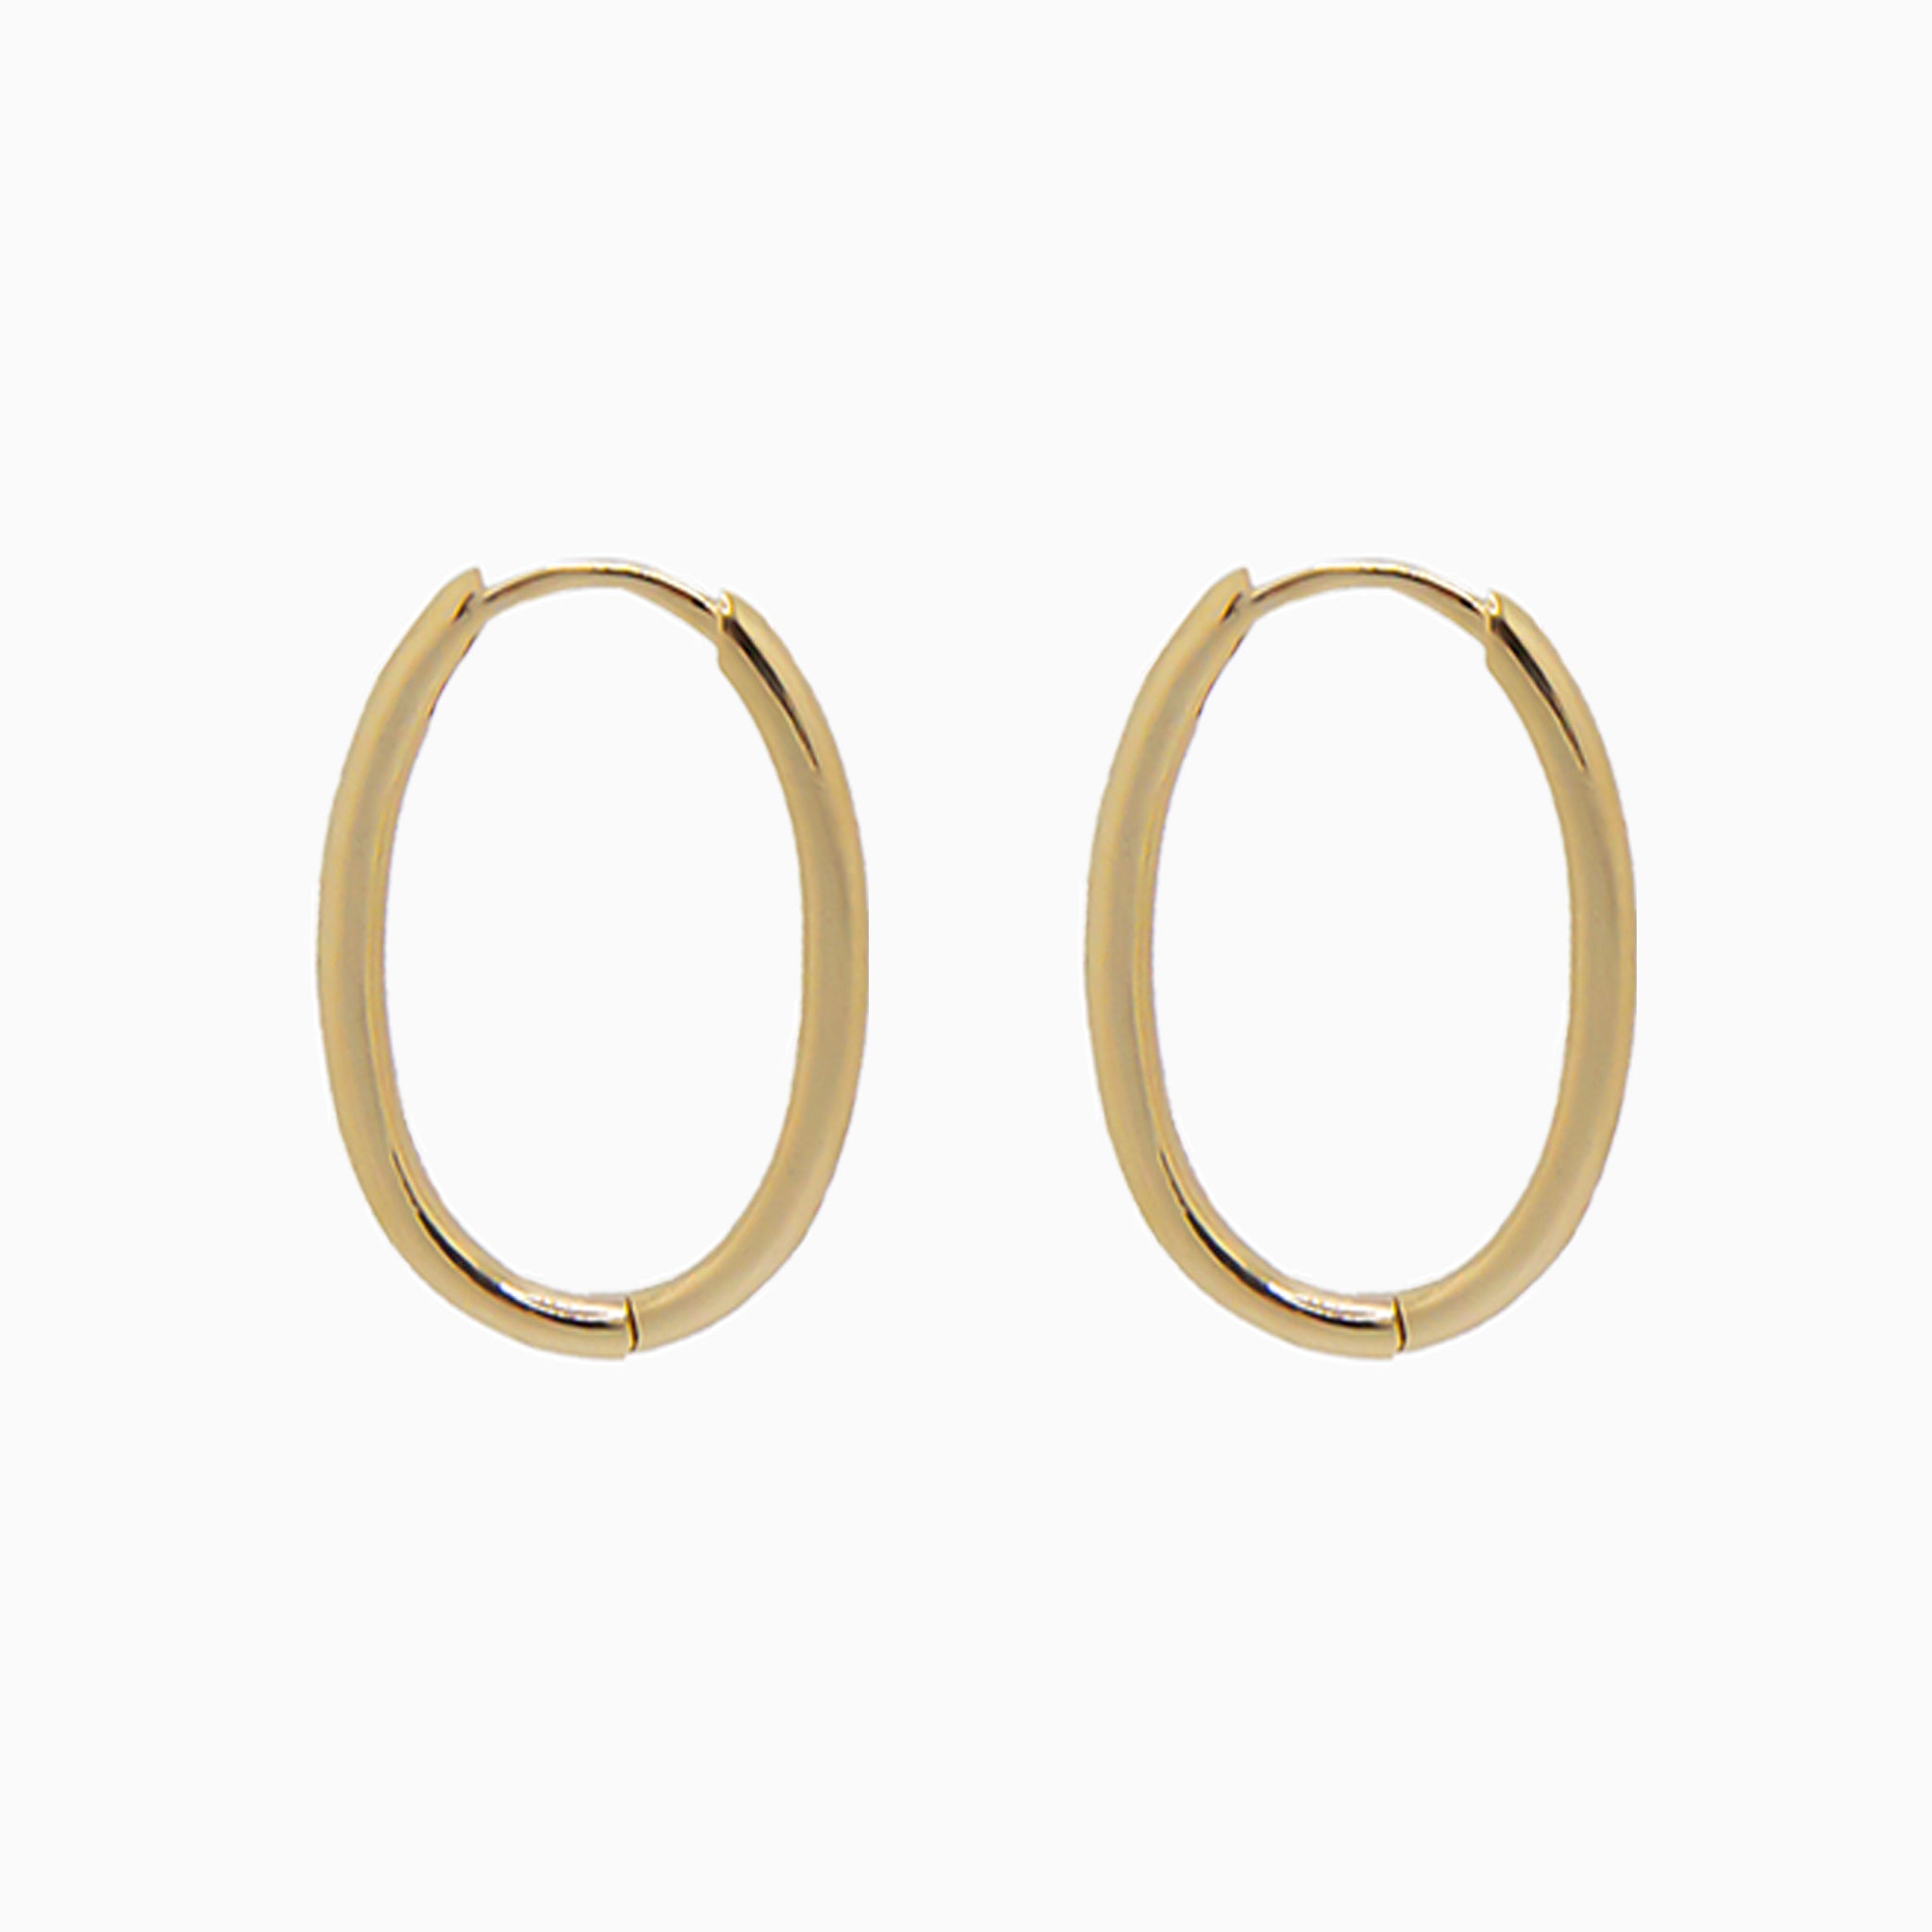 14k Yellow Gold 19mm x 13mm Hinged Everyday Oval Hoop Earrings, Side View